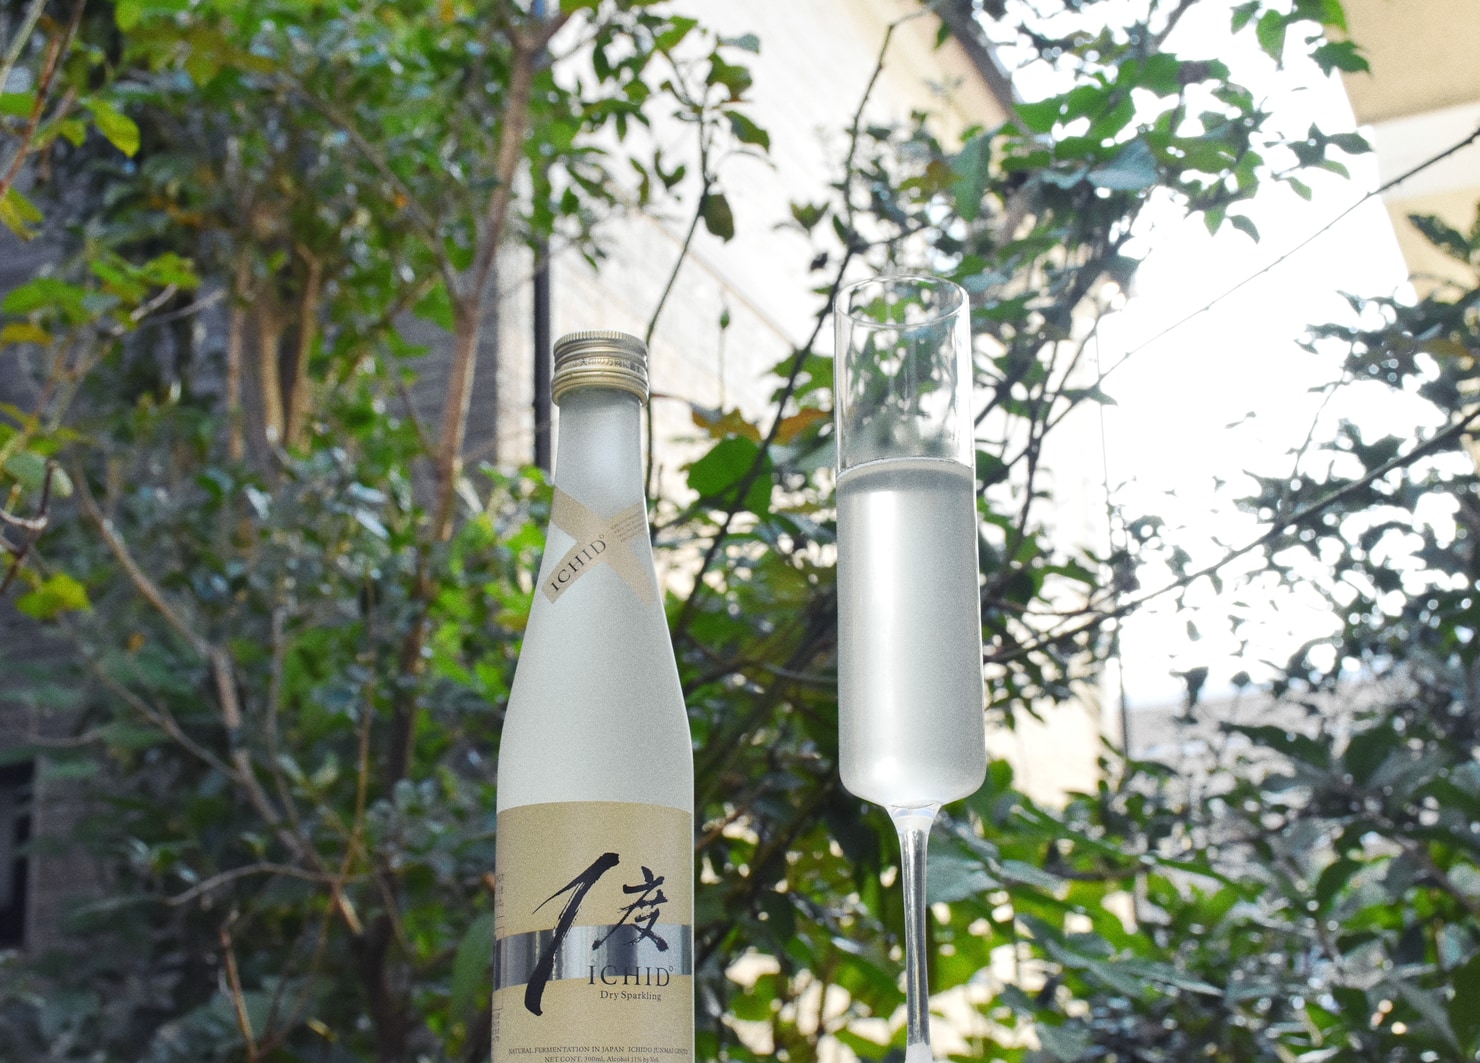 Celebrate the Special Moments With Sparkling Sake From Ichido